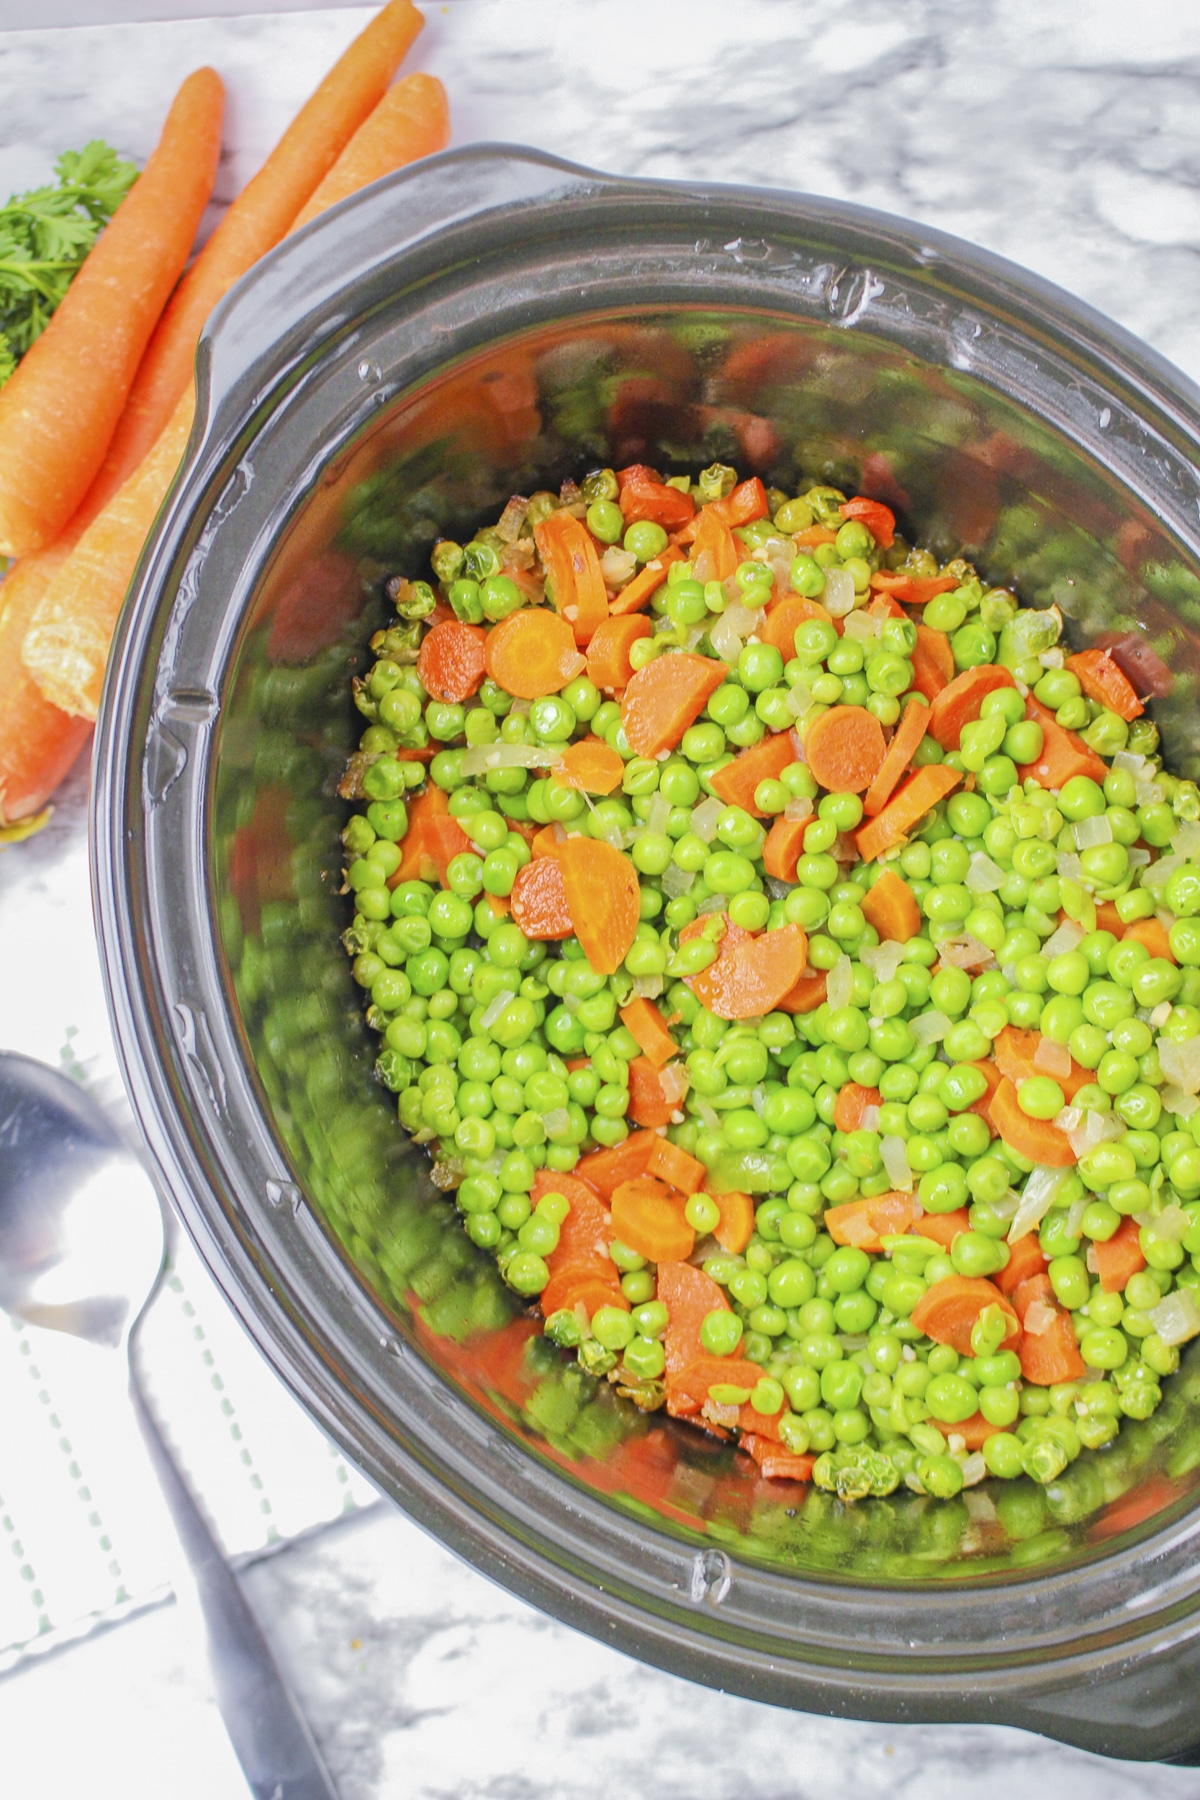 Peas and carrots cooked in the slow cooker